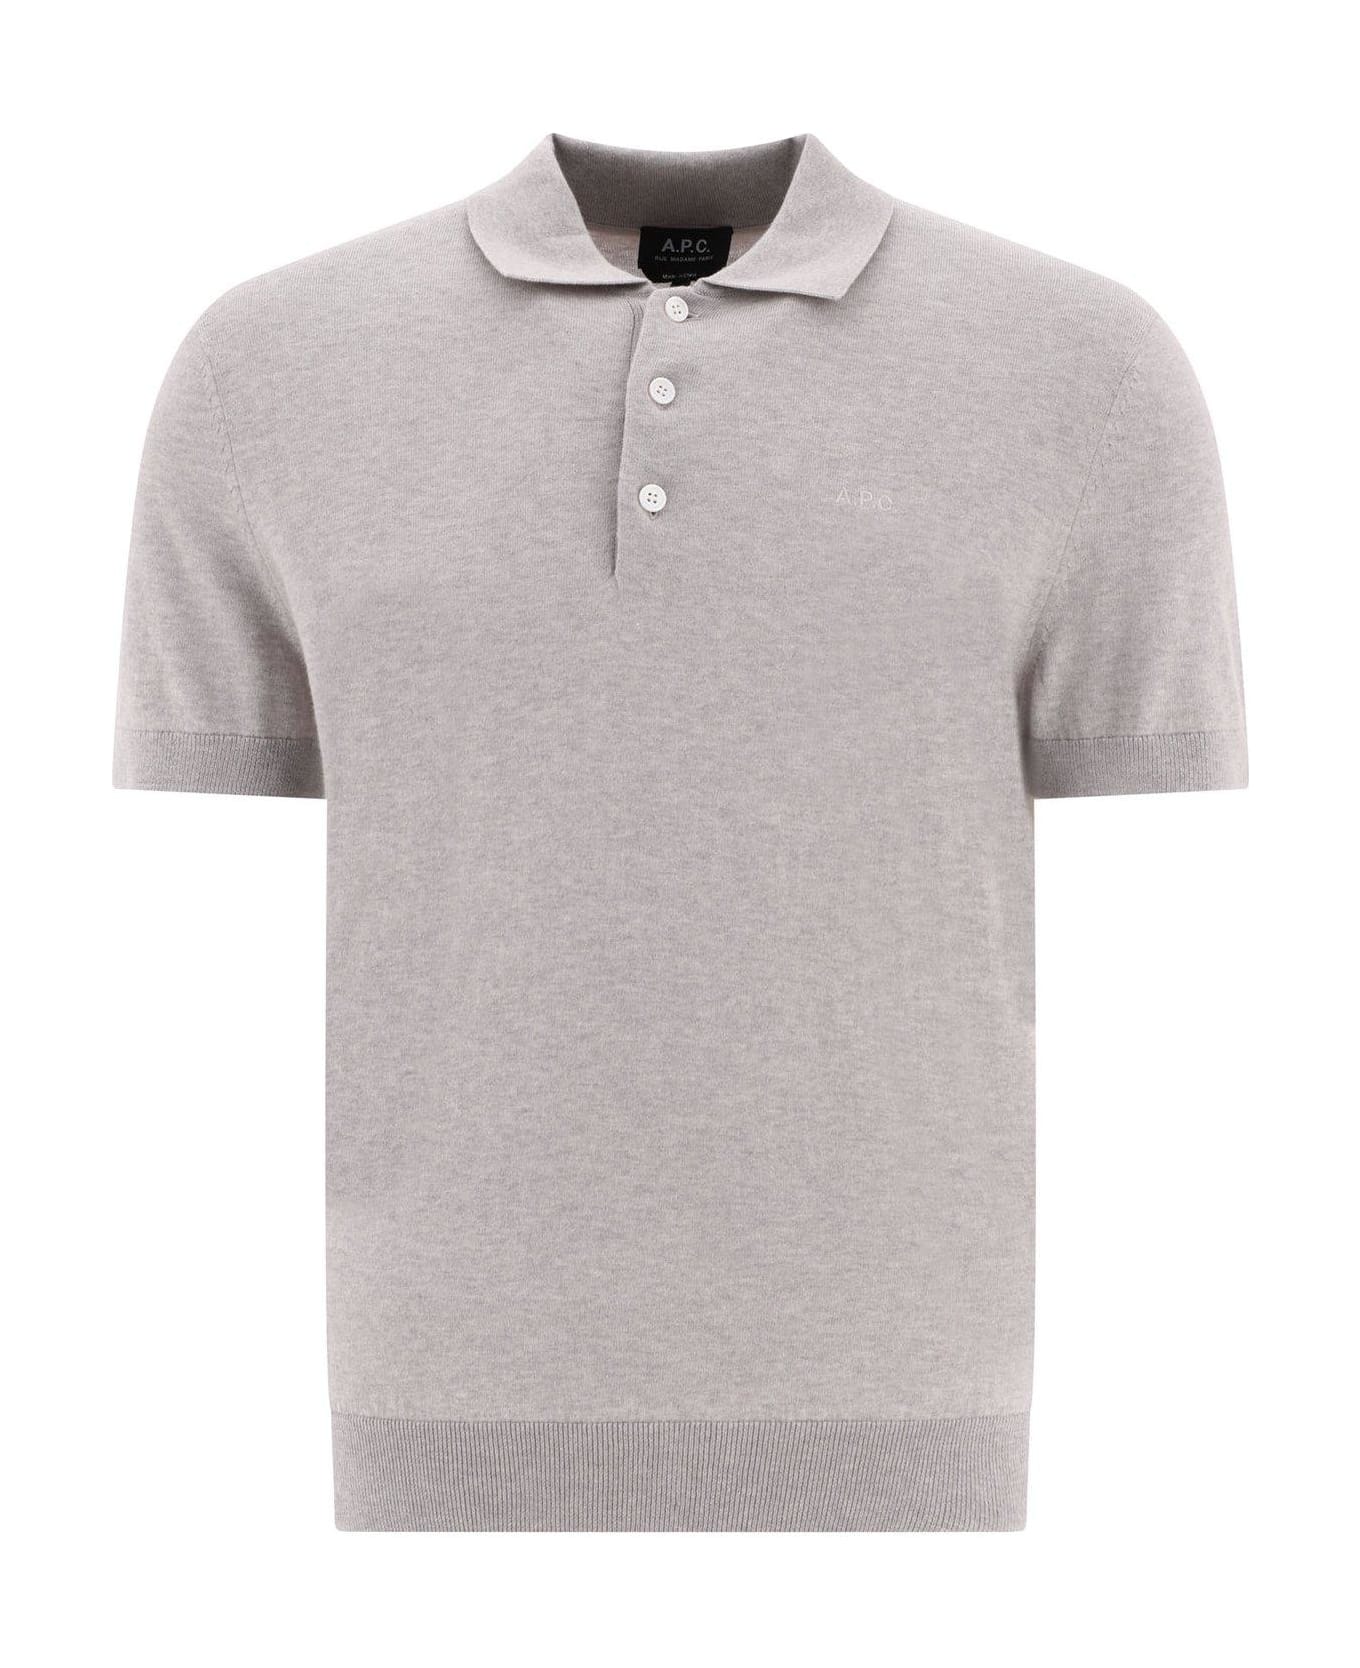 A.P.C. Gregory Logo Embroidered Polo Shirt - Grey